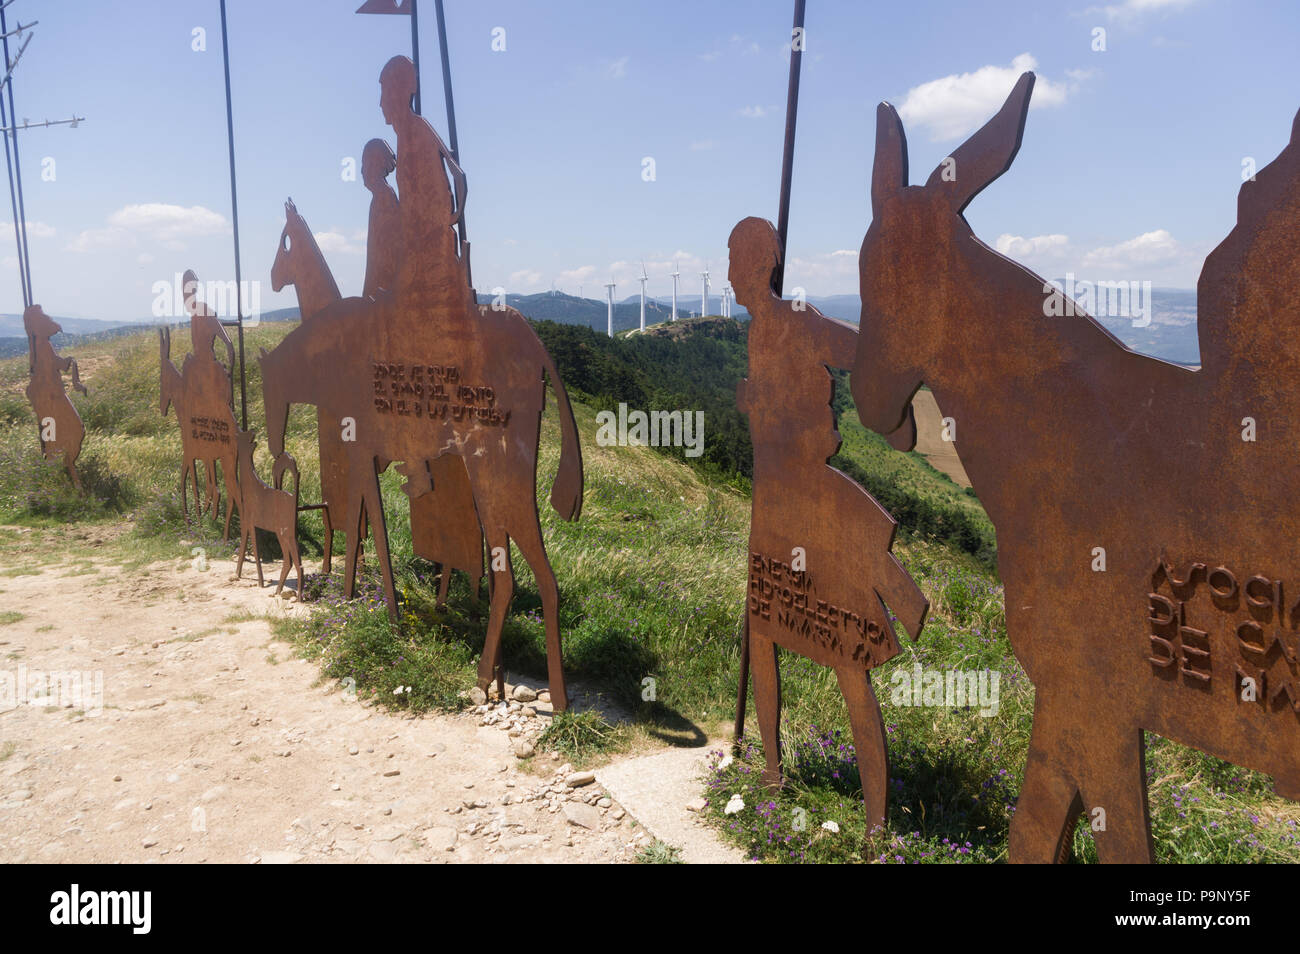 Zizur Mayor, Spain (9th July 2018) - The monument to the pilgrims on the Alto del perdon between Pamplona and Ponte la Reina Stock Photo